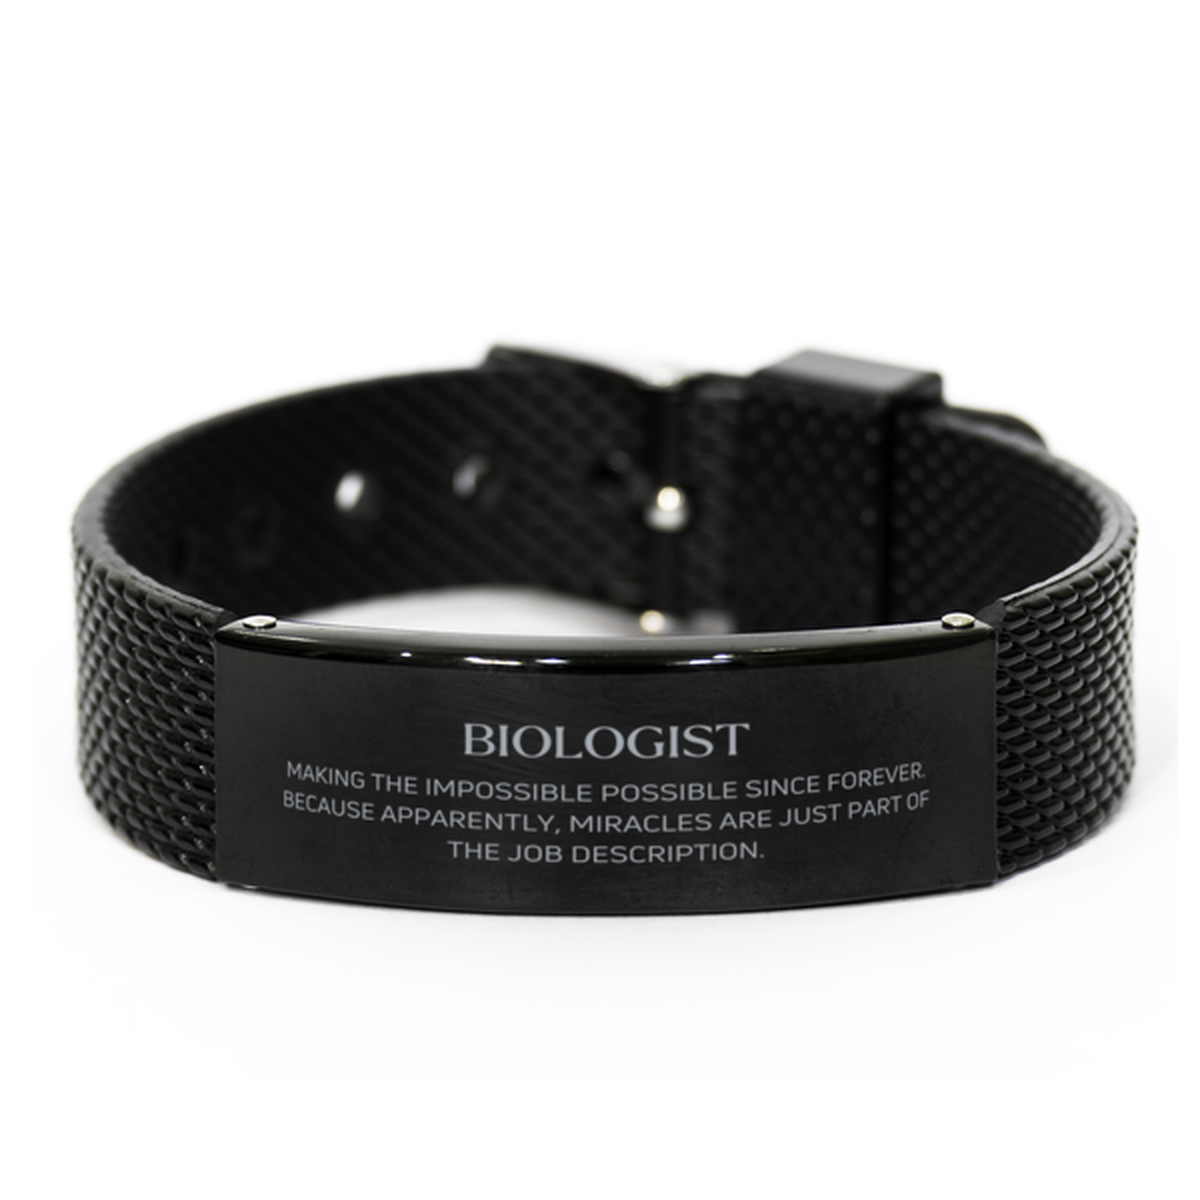 Funny Biologist Gifts, Miracles are just part of the job description, Inspirational Birthday Black Shark Mesh Bracelet For Biologist, Men, Women, Coworkers, Friends, Boss